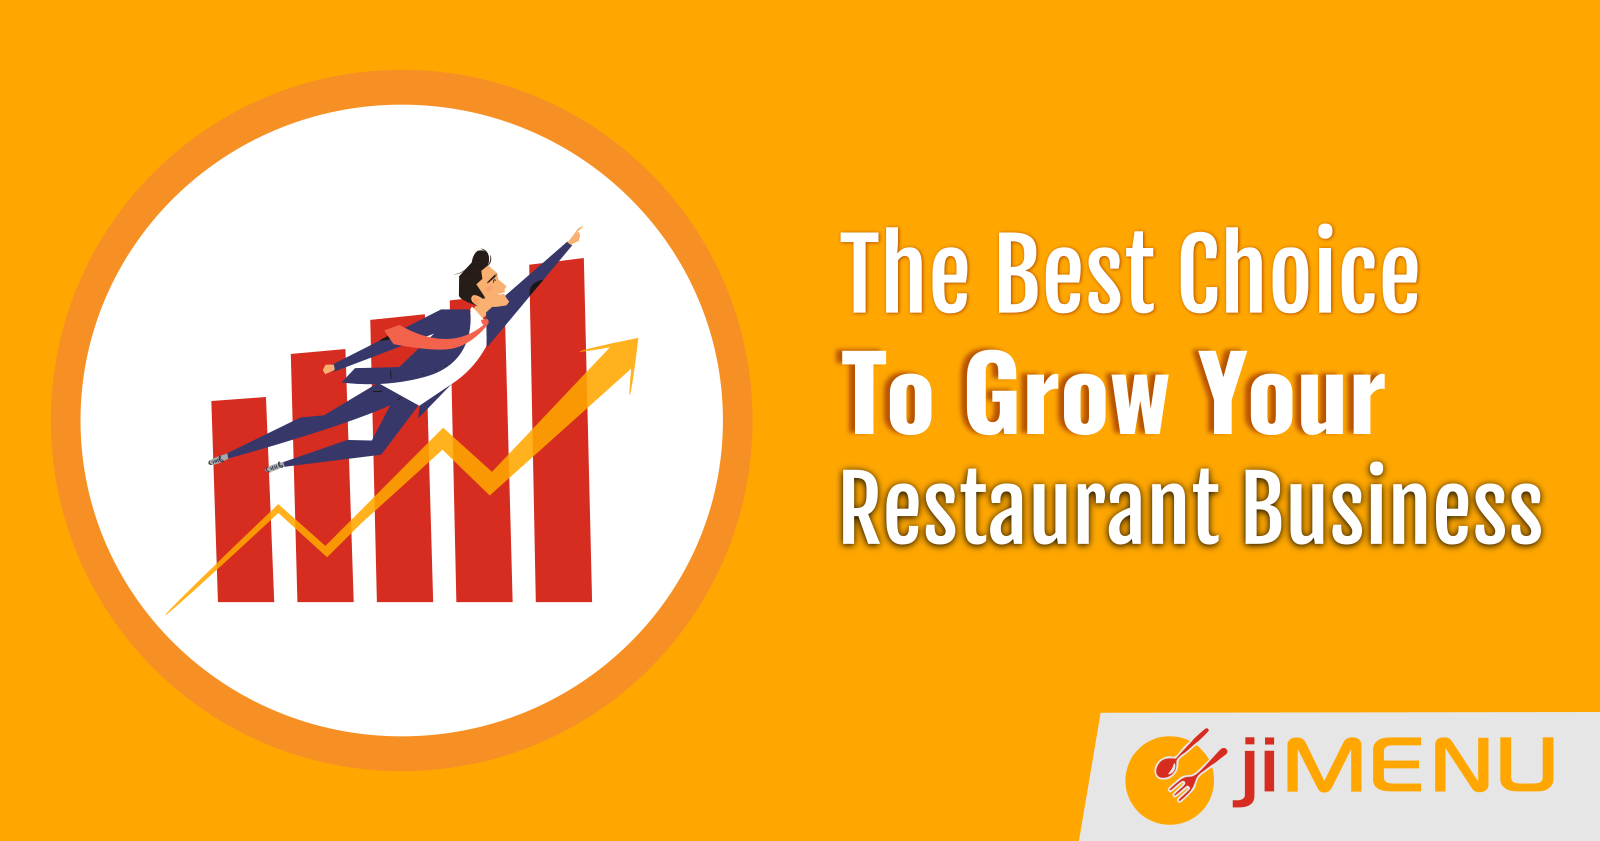 Restaurant POS Software: The Best Choice To Grow Your Restaurant Business